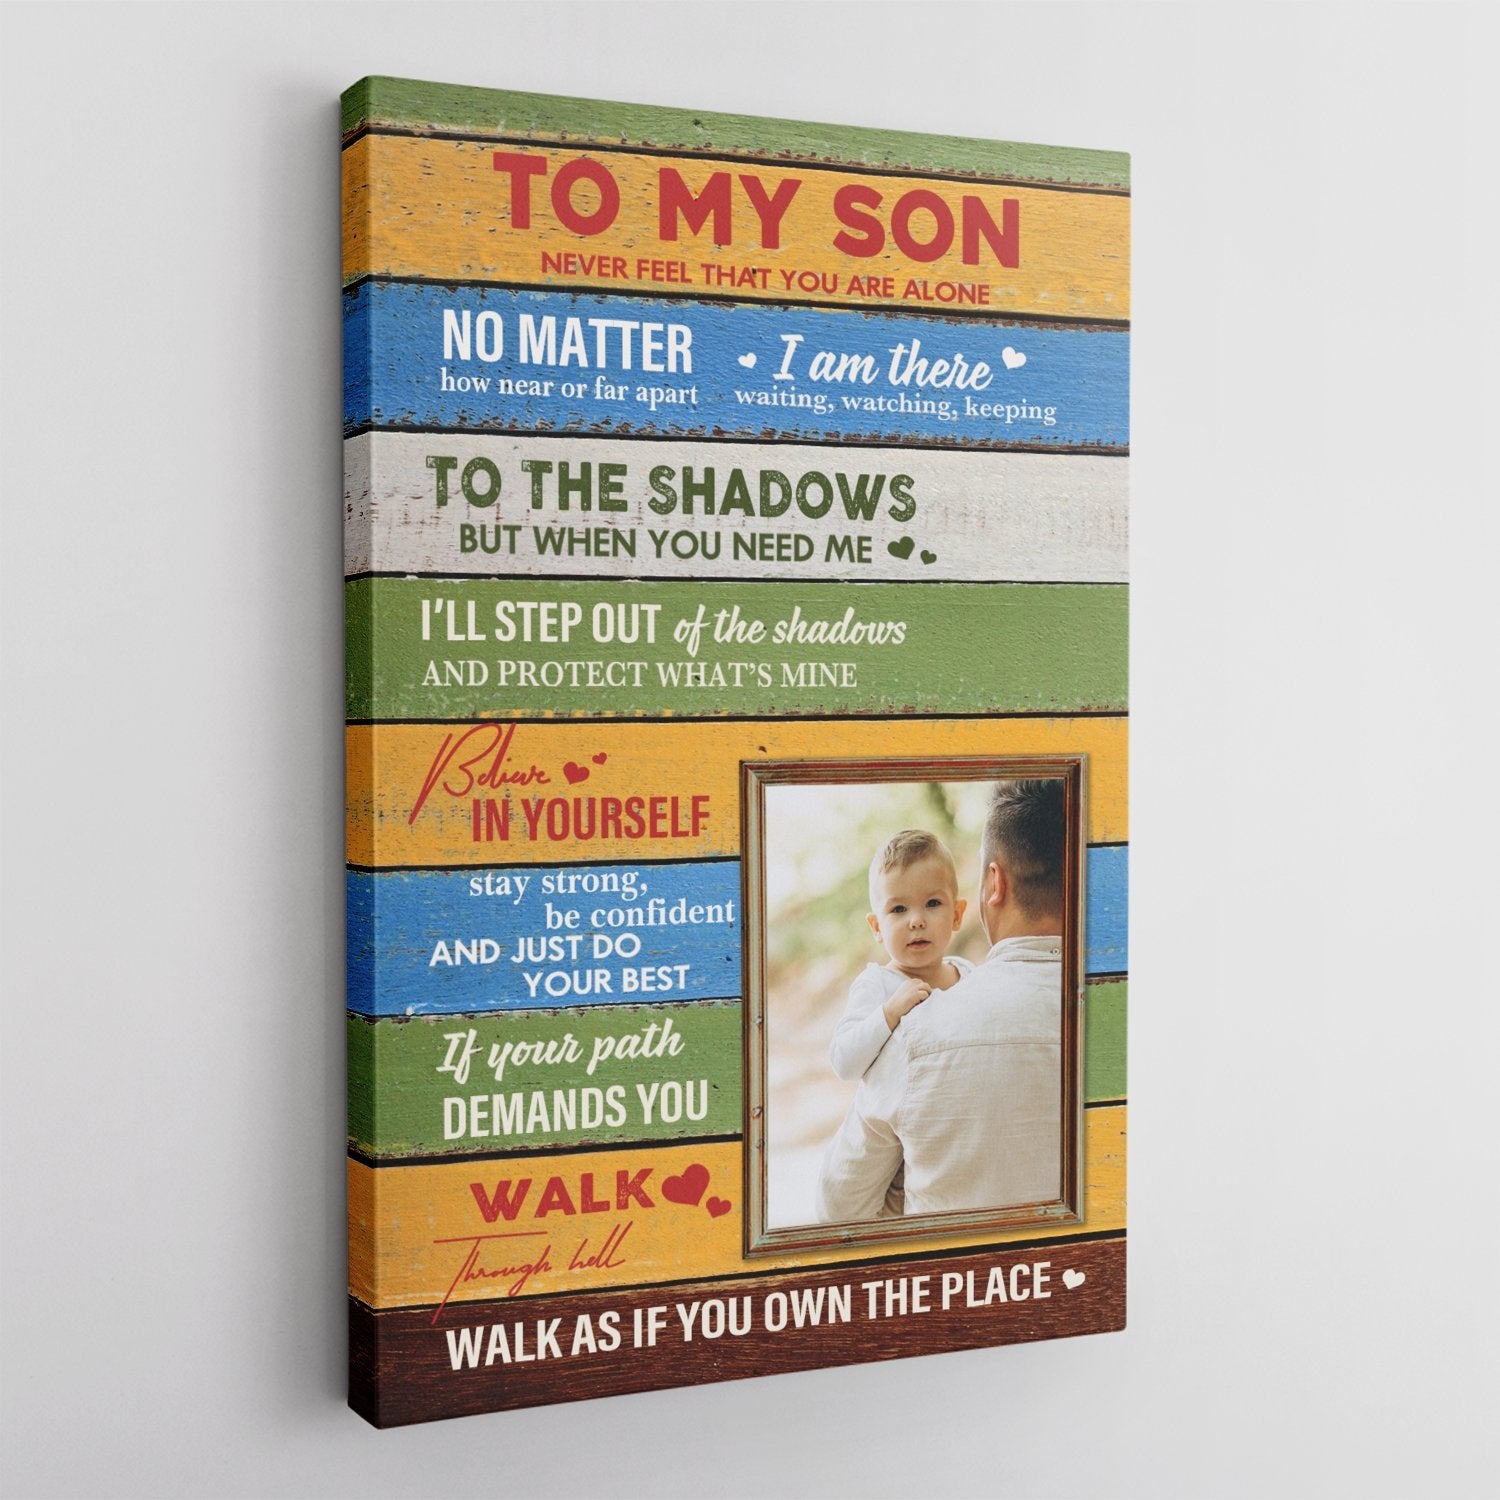 Want a gift to encourage your son? So give him this Son Wall Art. This gift will let him know that wherever you are, you always love and care for him. It’s surely the sweetest thing for your son on father’s day.